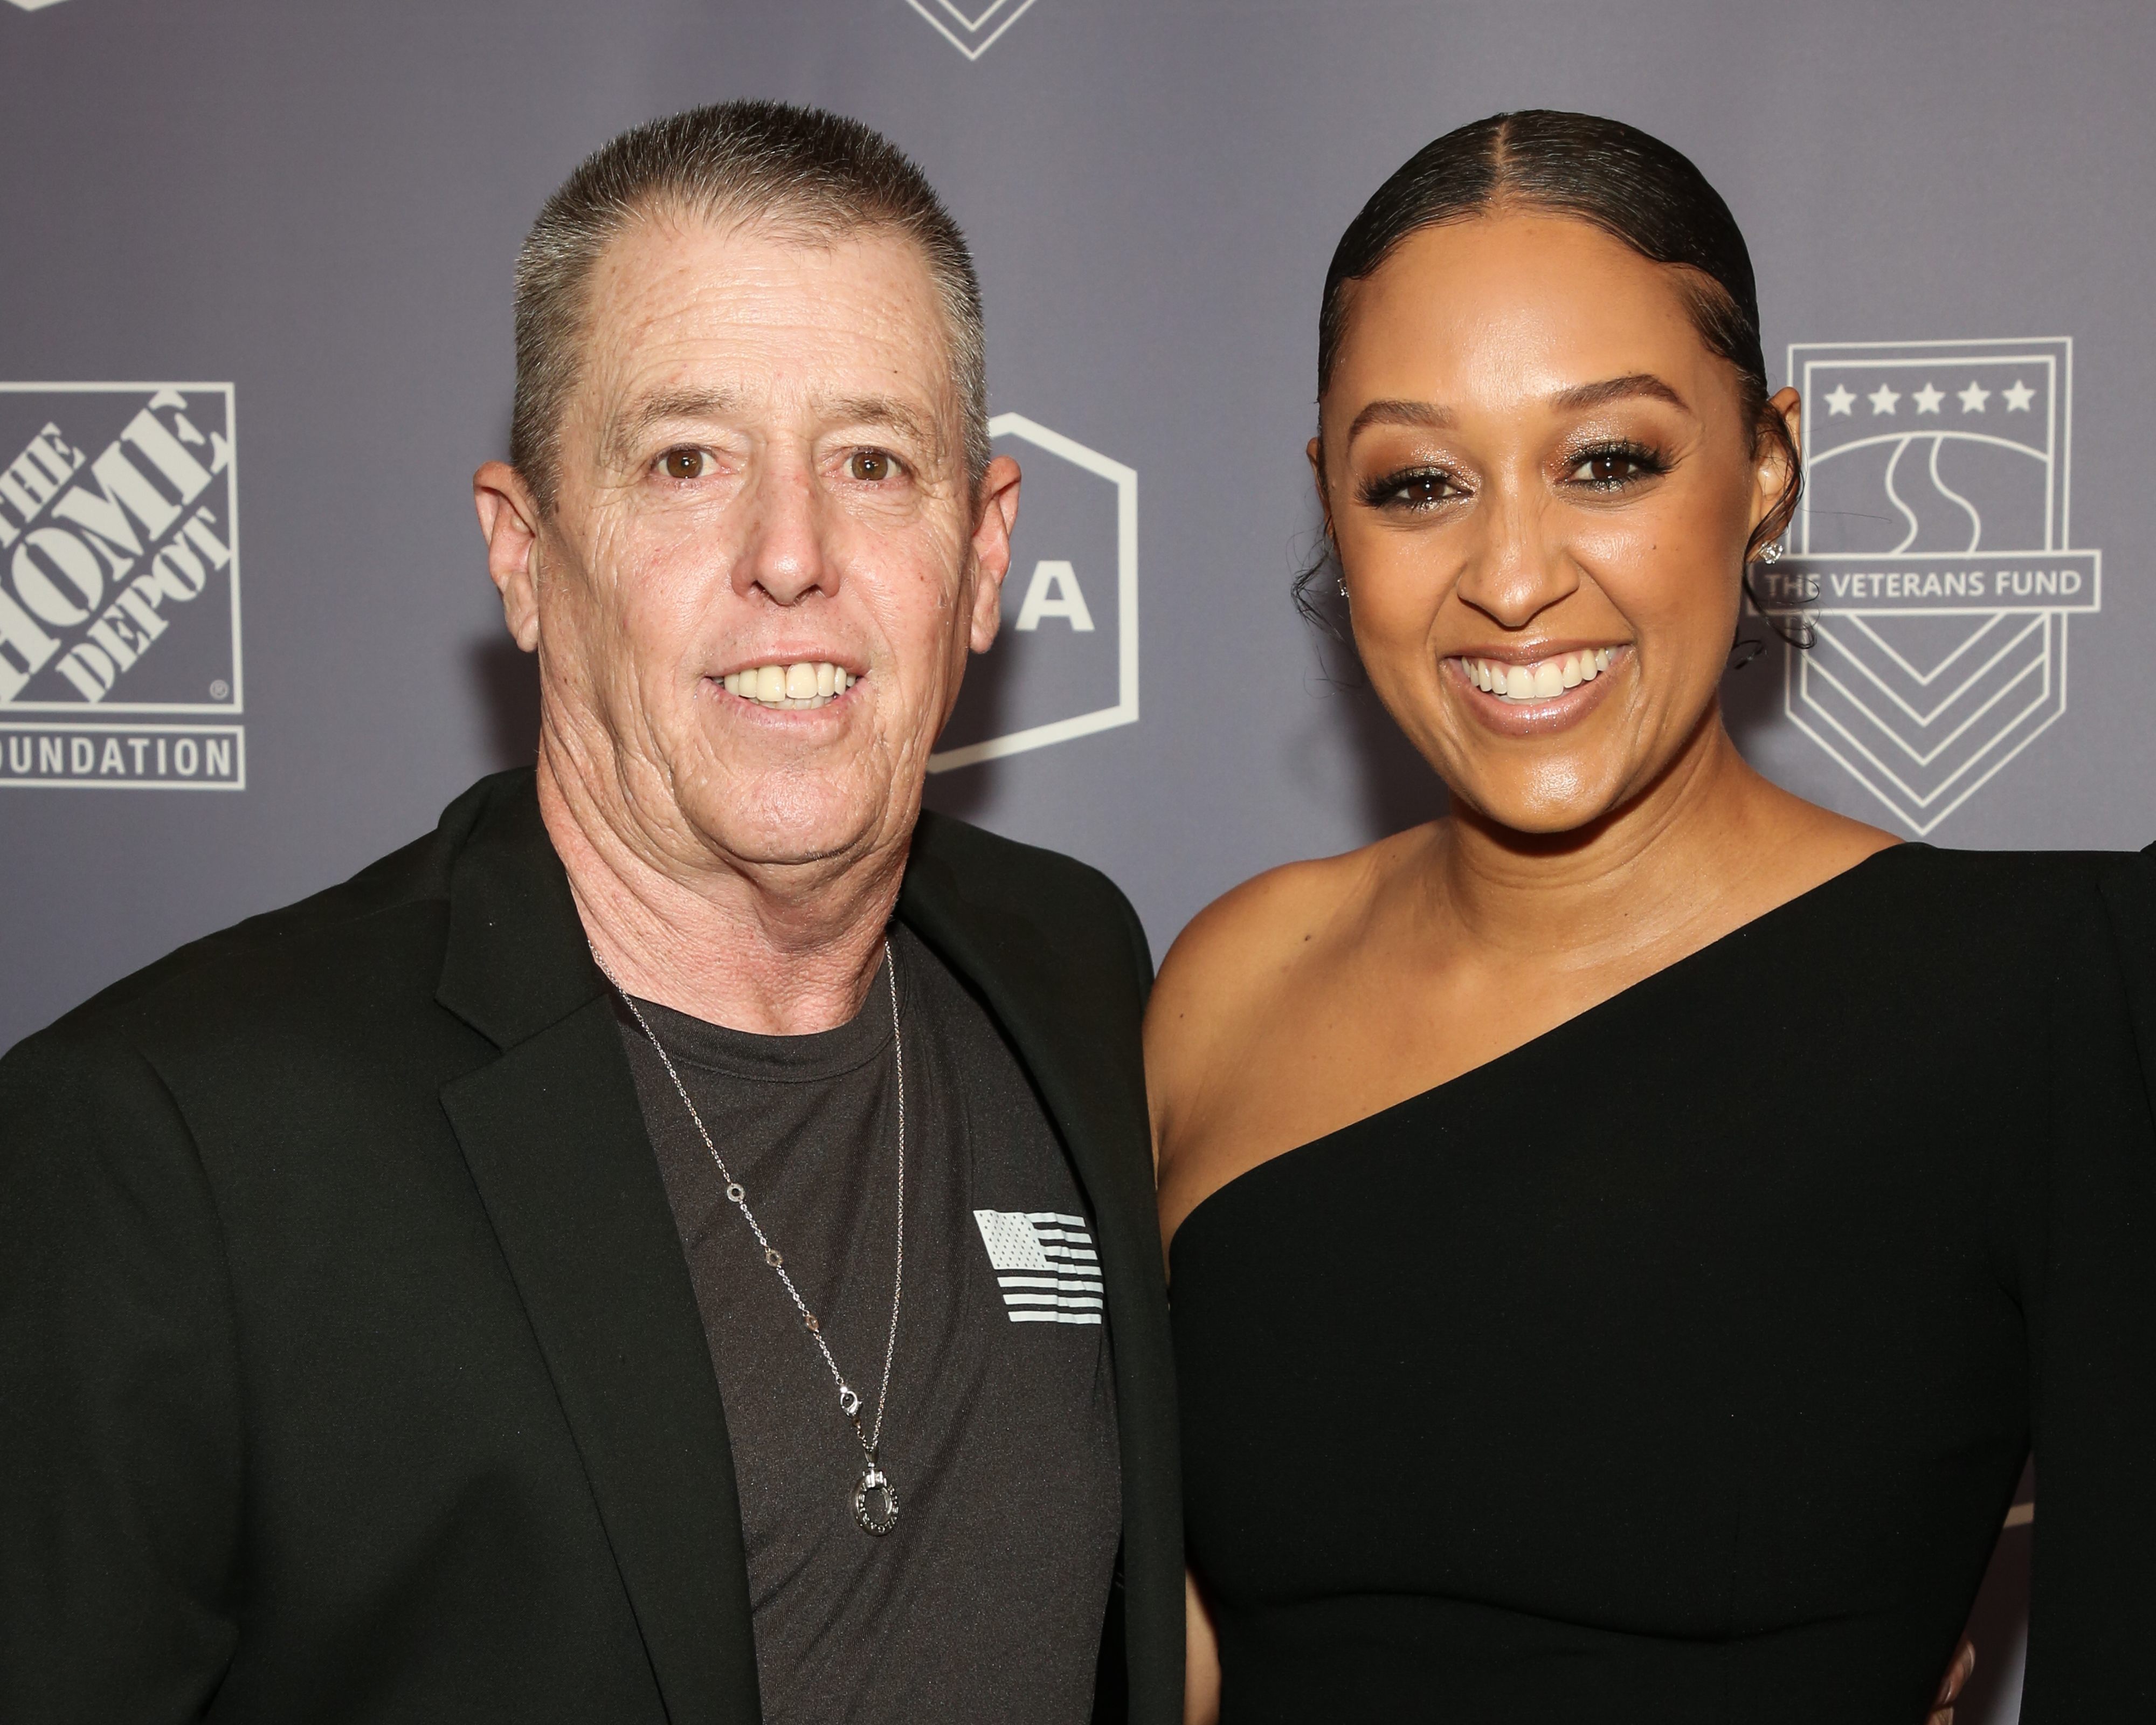 Timothy Mowry and Tia Mowry attend the 2019 U.S. Vets Salute Gala at The Beverly Hilton Hotel on November 5, 2019, in Beverly Hills, California. | Source: Getty Images